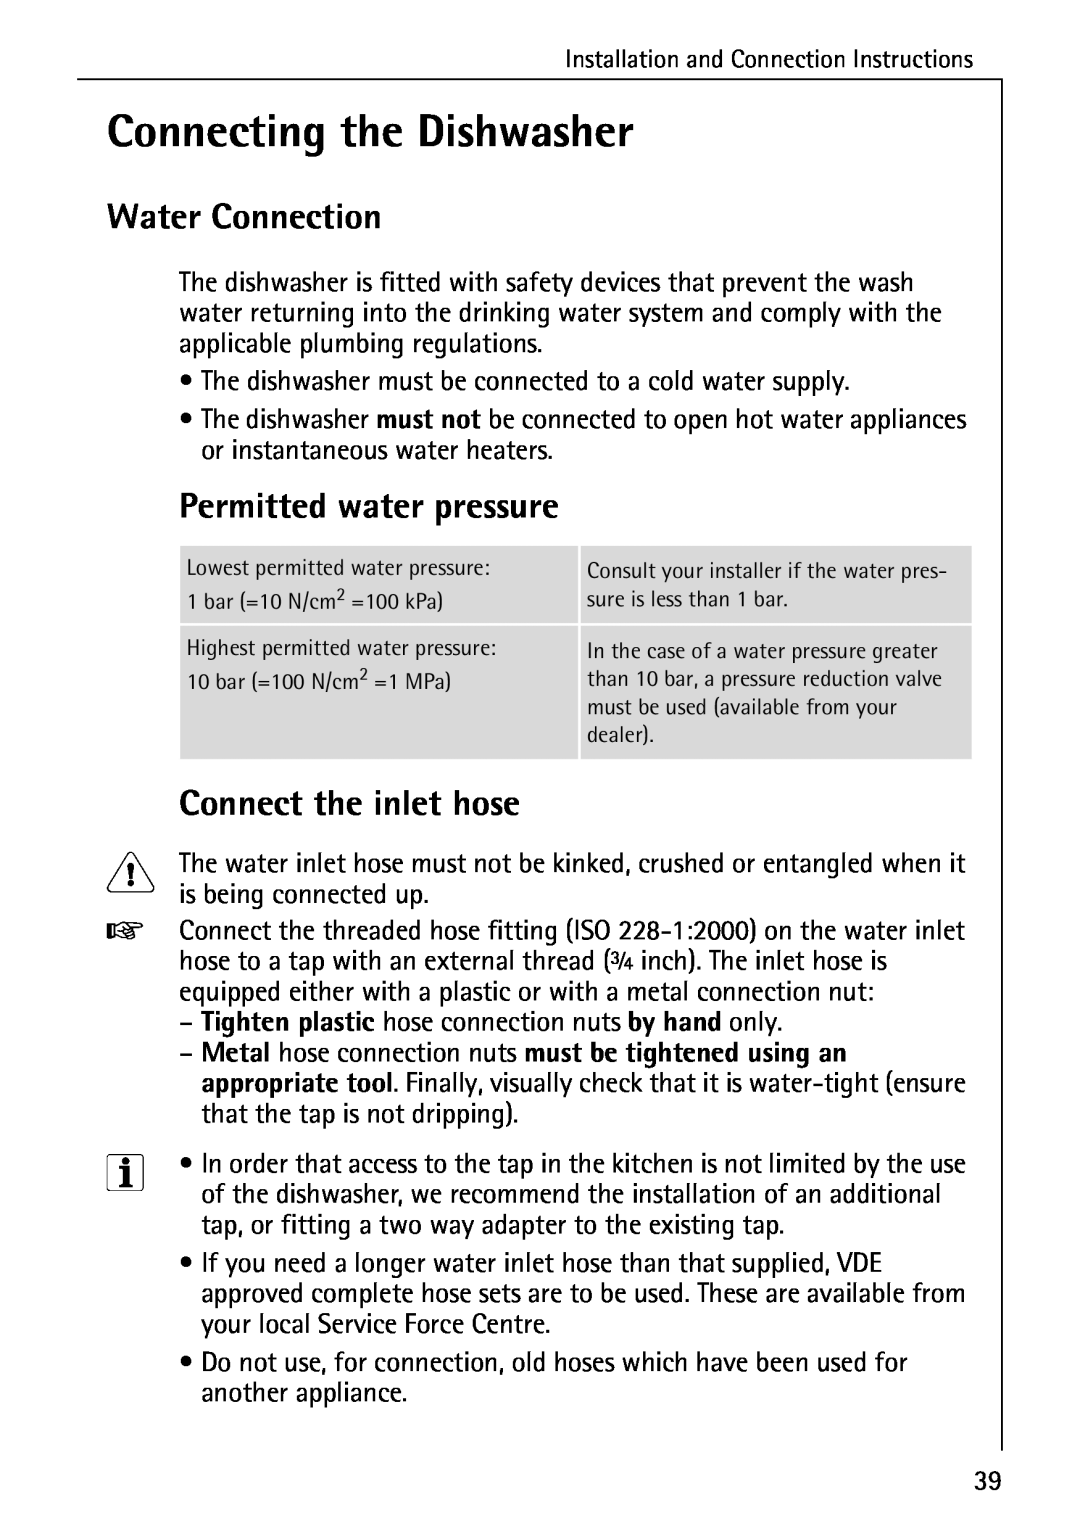 AEG 40740 manual Connecting the Dishwasher, Water Connection, Permitted water pressure, Connect the inlet hose 